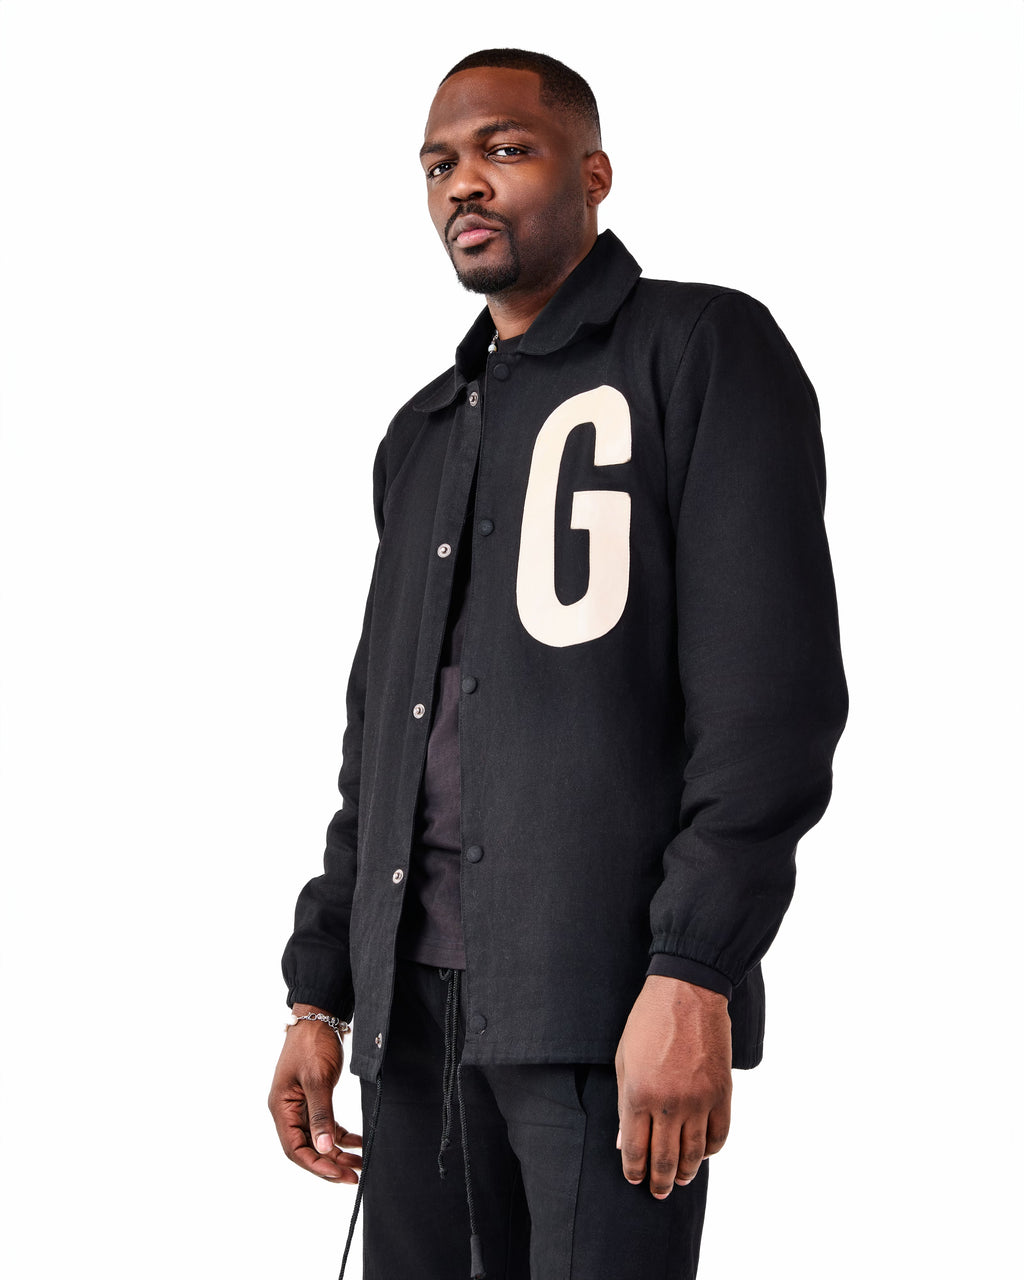 G All-Star Warm Up Jacket